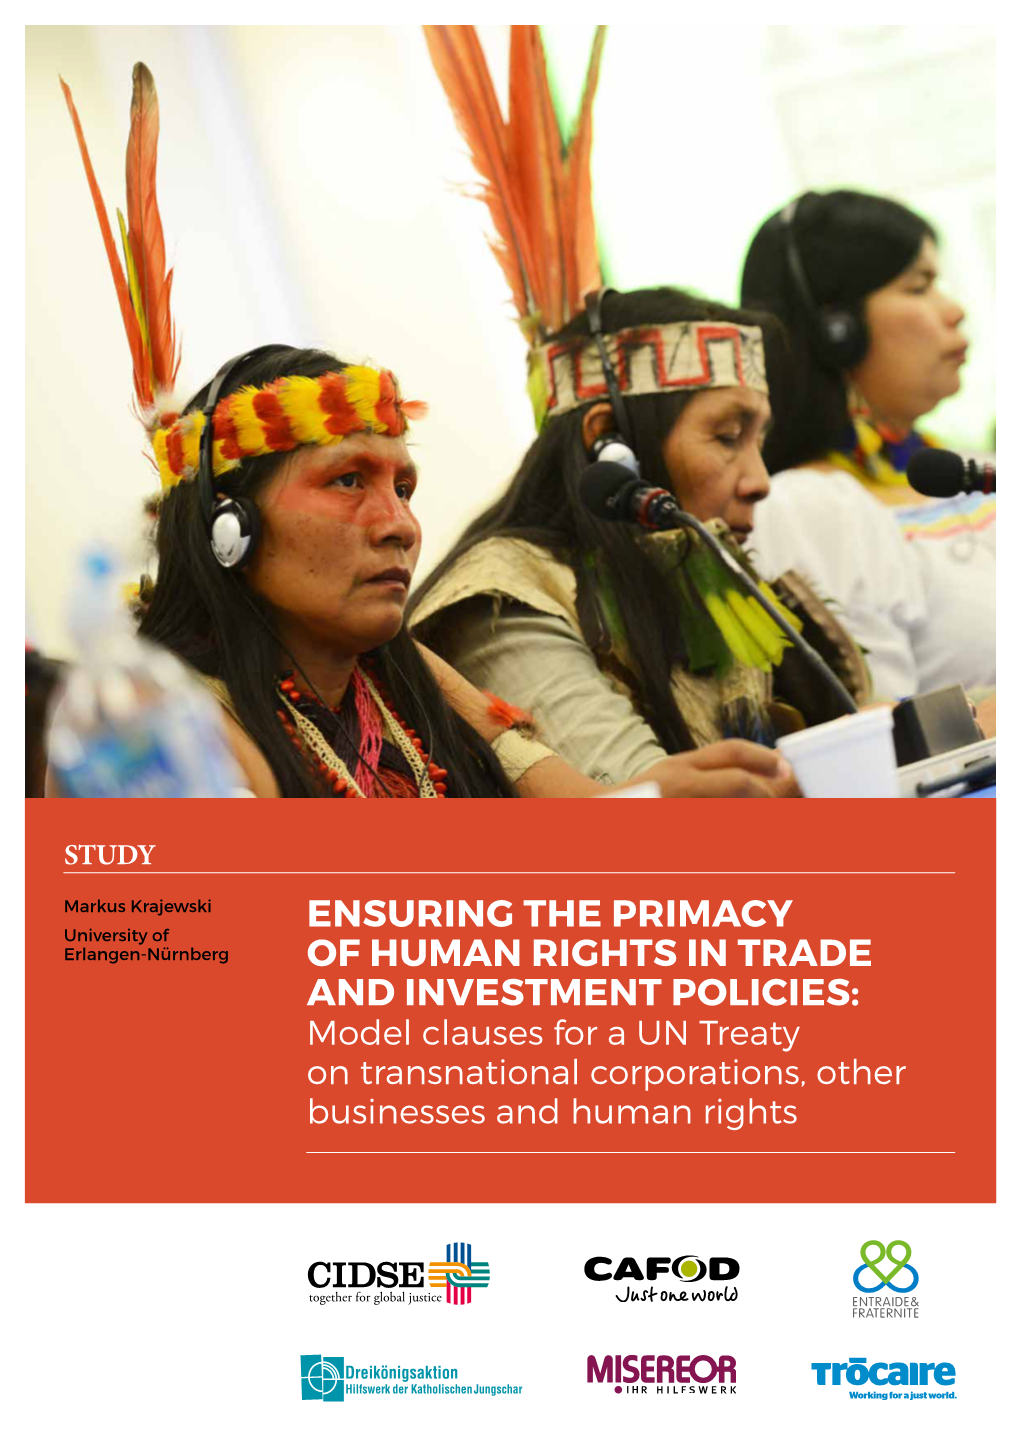 Ensuring the Primacy of Human Rights in Trade and Investment Policies